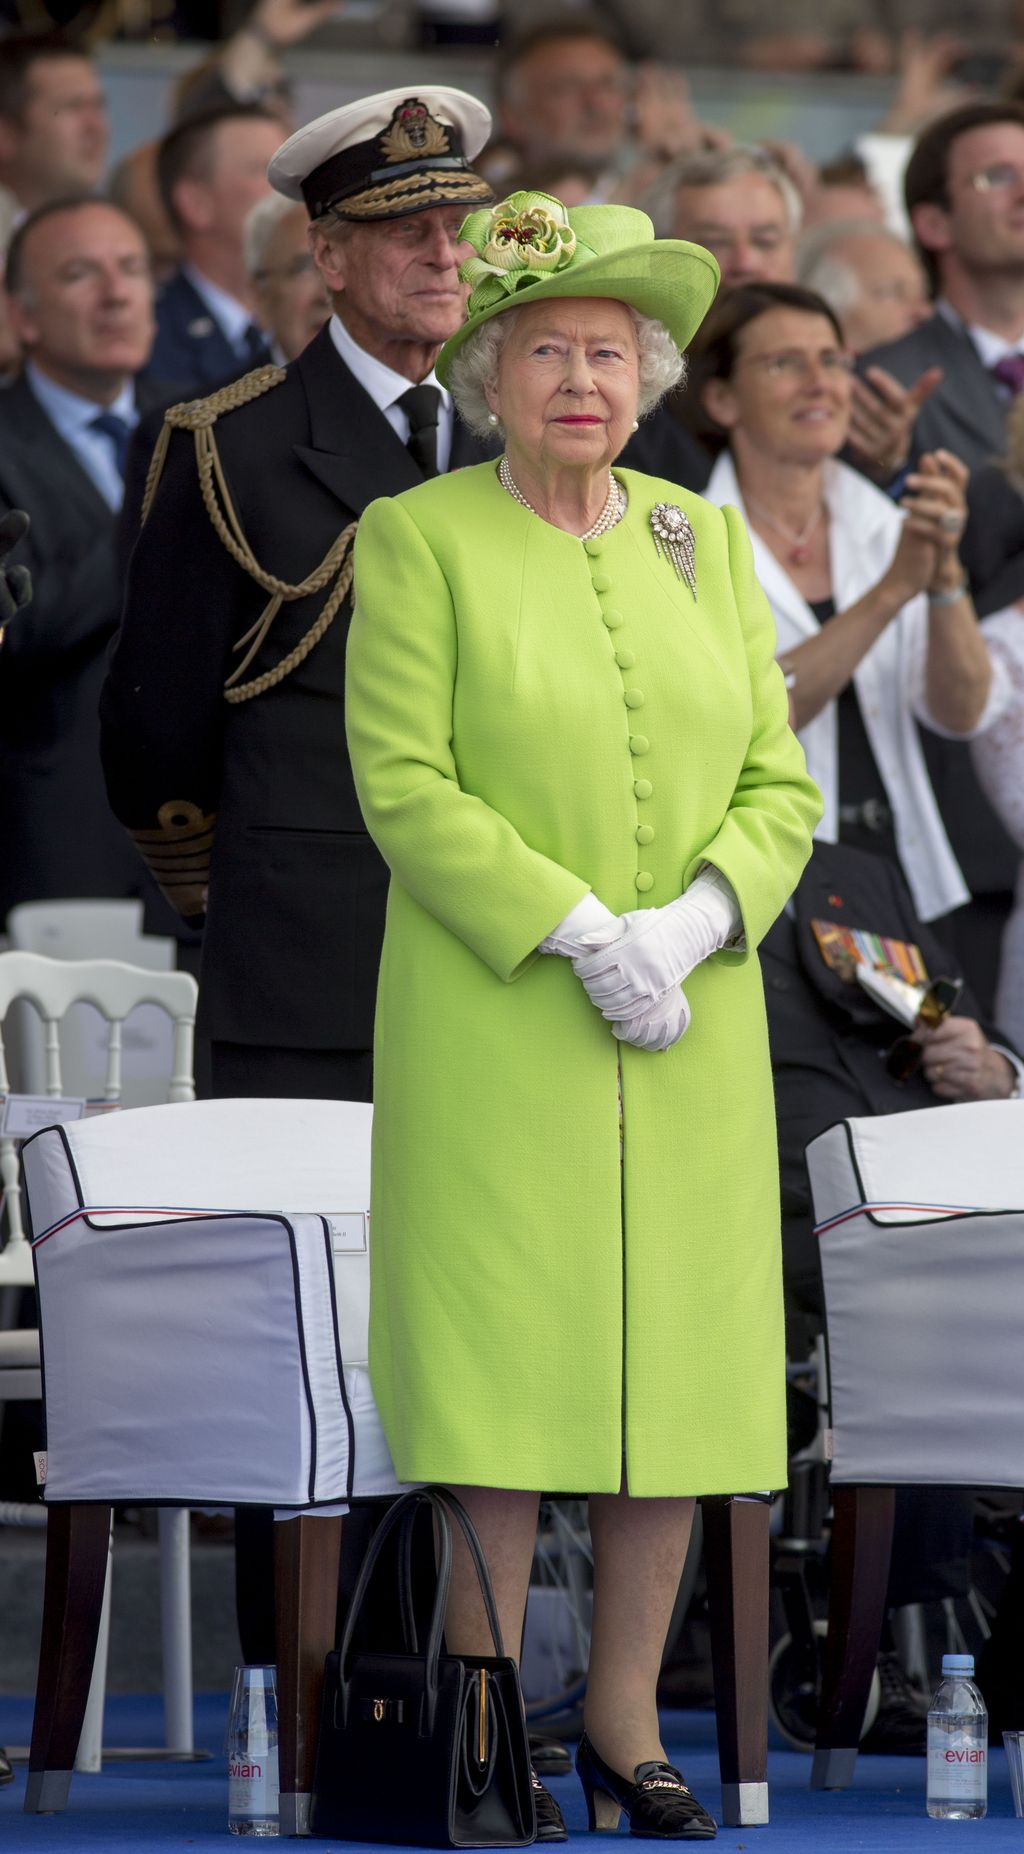 OUISTREHAM, FRANCE - JUNE 06:  (UK OUT FOR 28 DAYS)  Queen Elizabeth II and Prince Philip, Duke of Edinburgh attend a Ceremony to Commemorate D-Day 70 on Sword Beach during D-Day 70 Commemorations on June 6, 2014 in Ouistreham, France.  (Photo by Pool/Samir Hussein/WireImage)